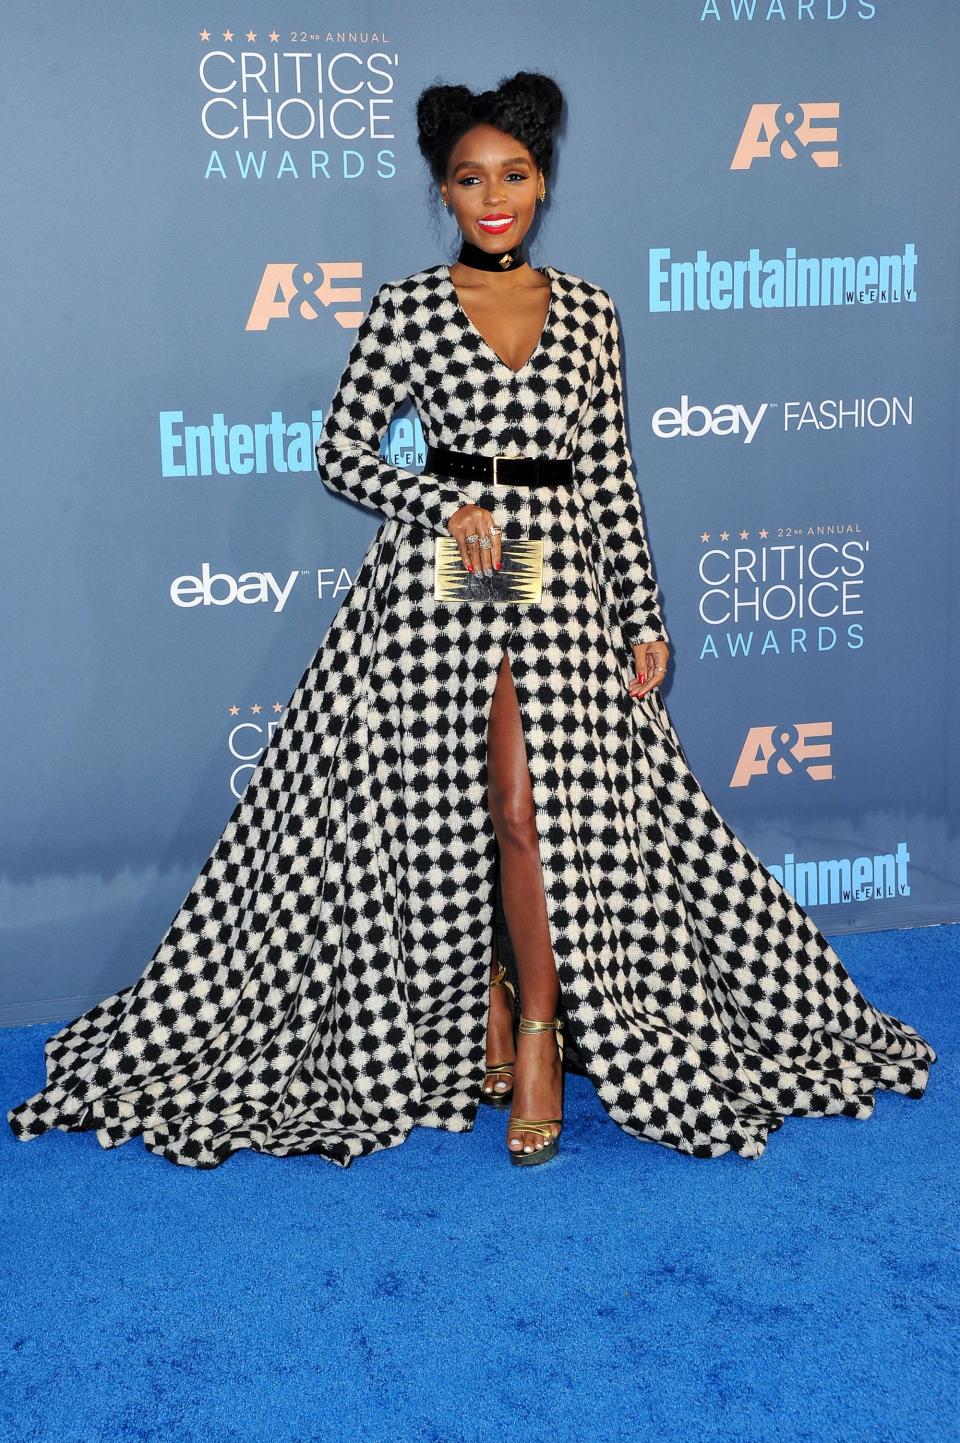 Janelle Monáe attends the 22nd Annual Critics' Choice Awards at Barker Hangar on December 11, 2016.